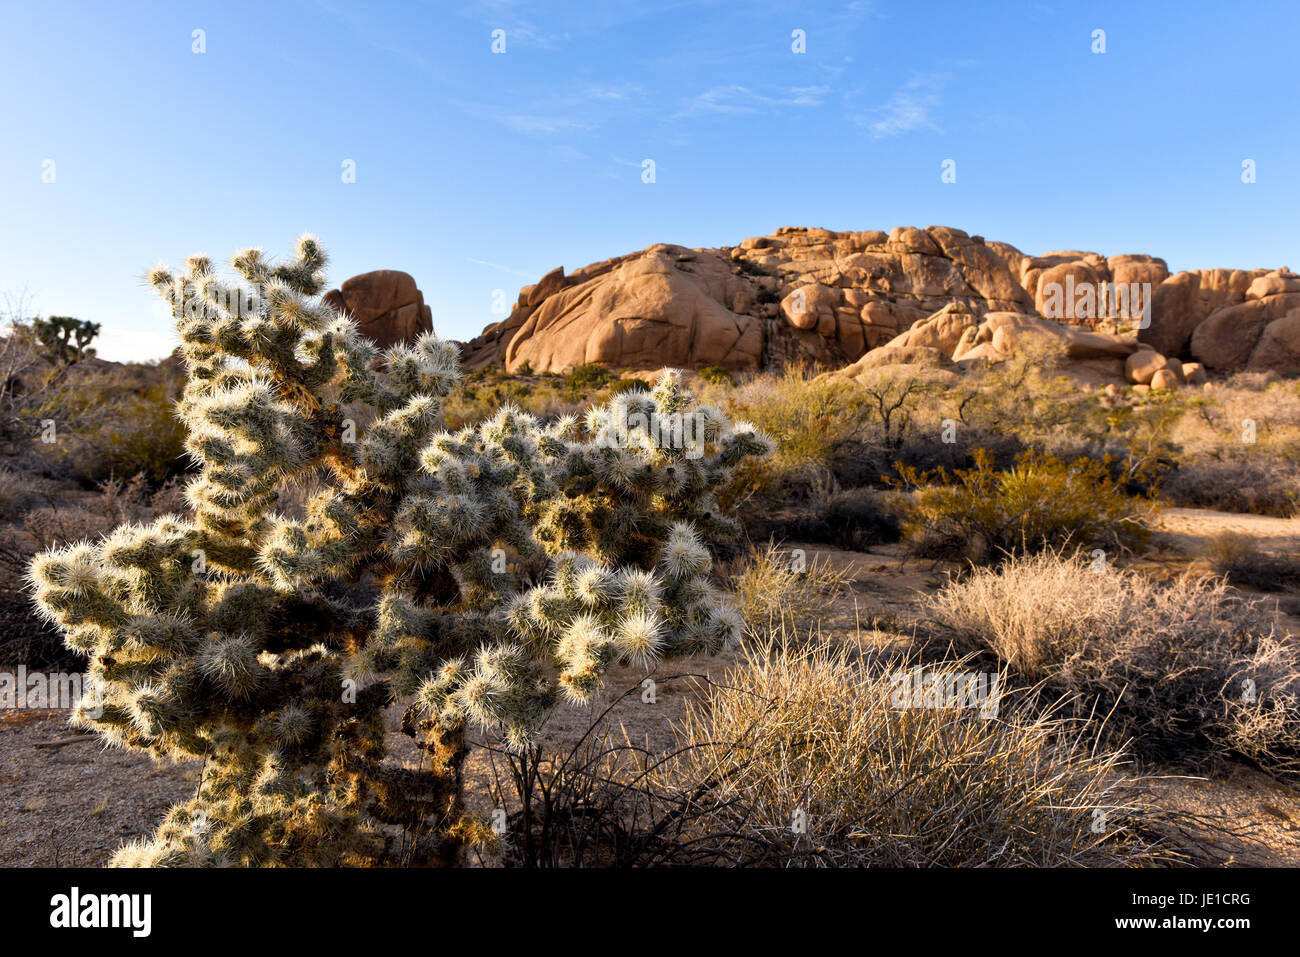 A Cylindropuntia fulgida or 'jumping cactus' found in the Desert Southwest USA. A Desert Landscape at Joshua Tree National Park Stock Photo